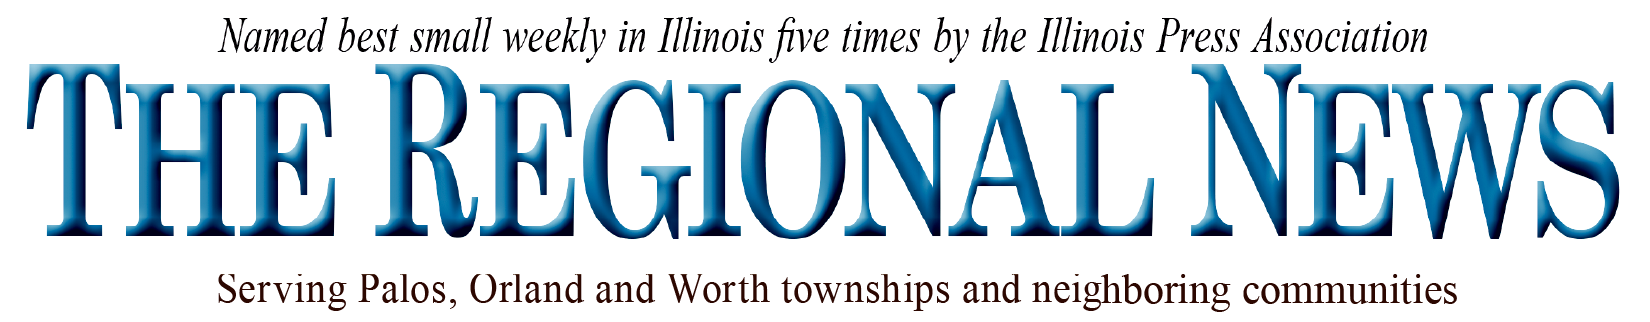 the-regional-news-logo-2.png